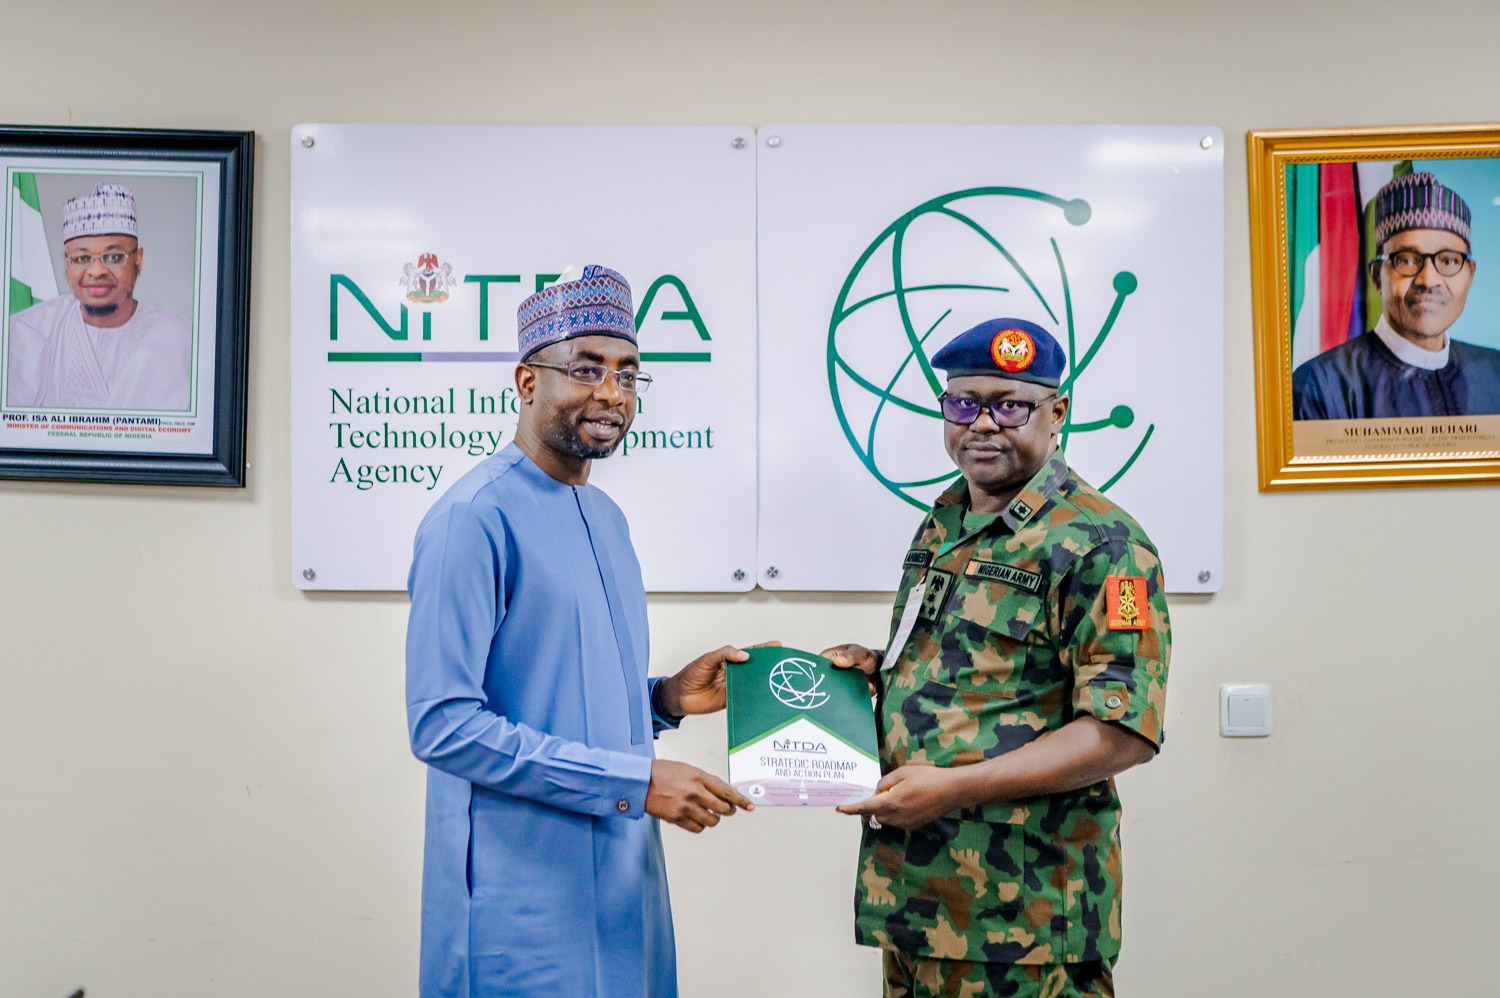 NITDA To Partner NYSC On Scaling Awareness & Adoption In Digital Technology